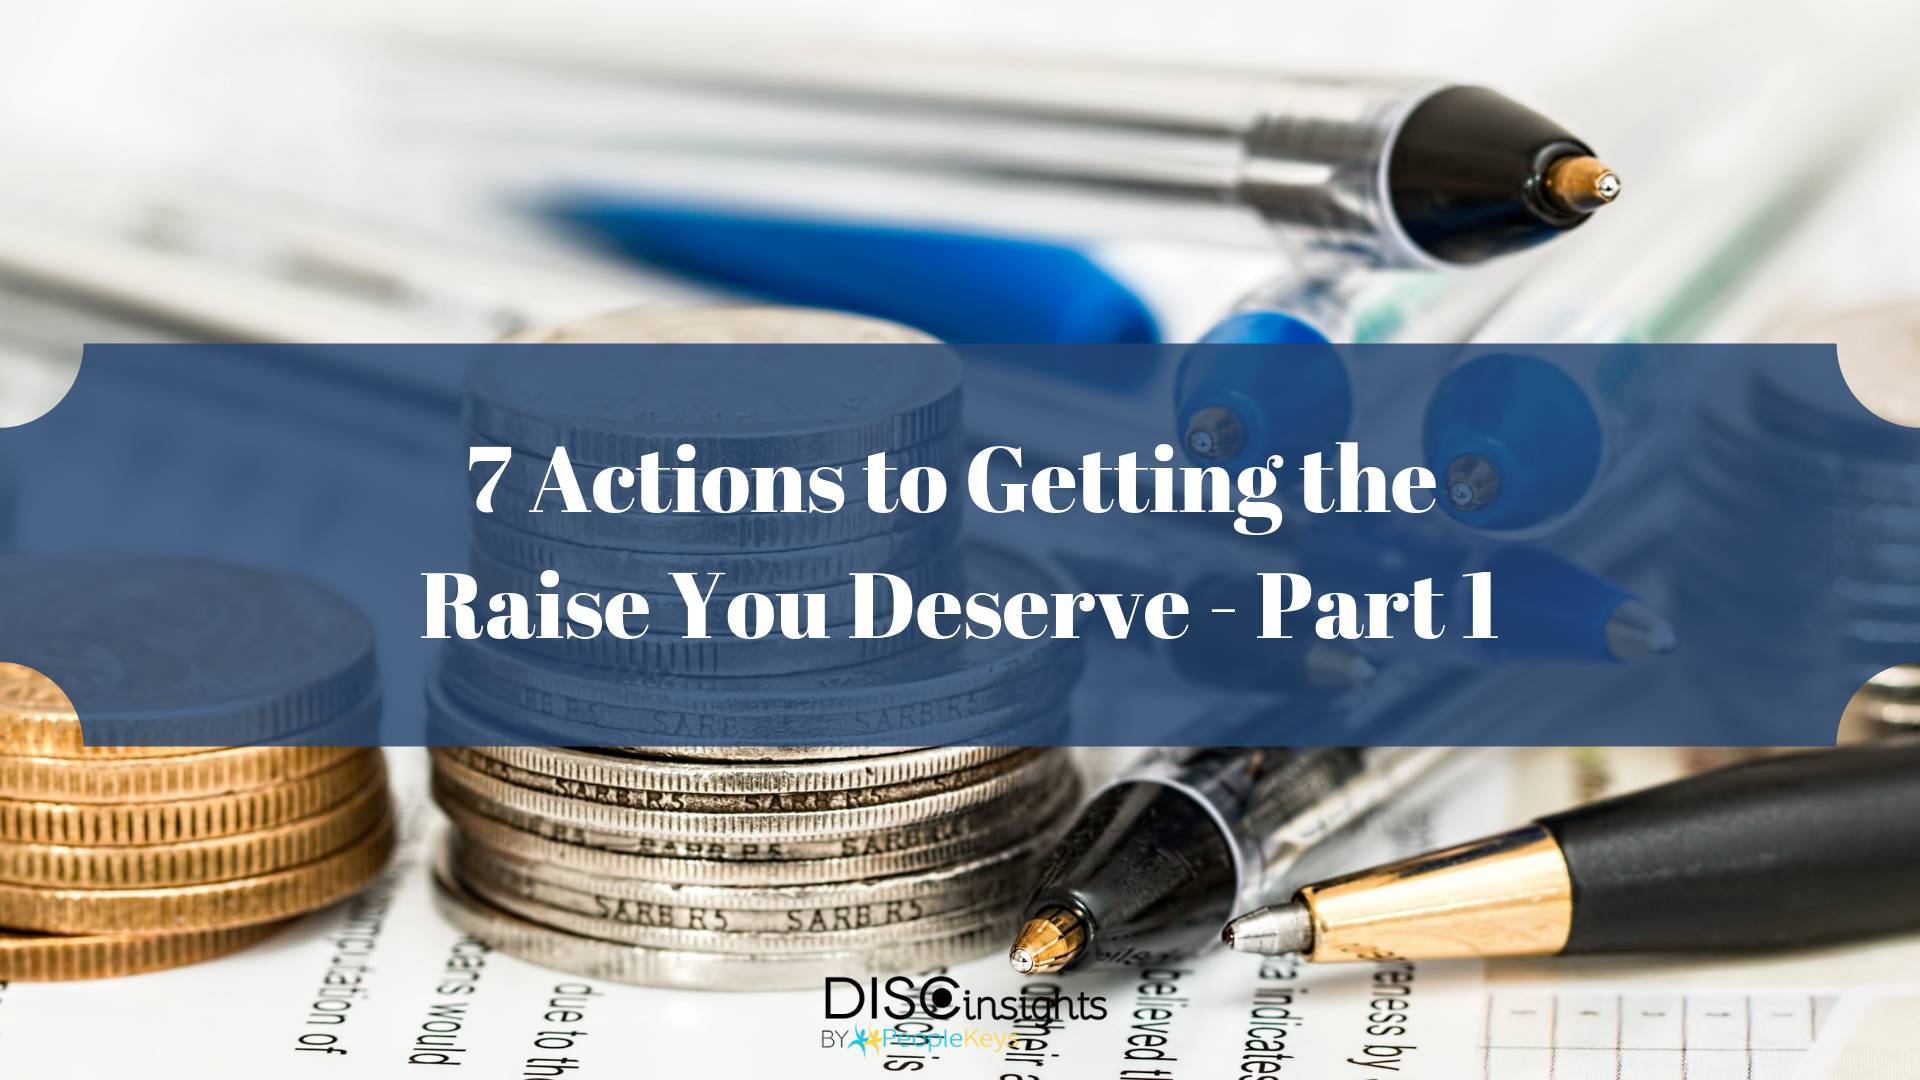 7 Actions to Getting the Raise You Deserve - Part 1